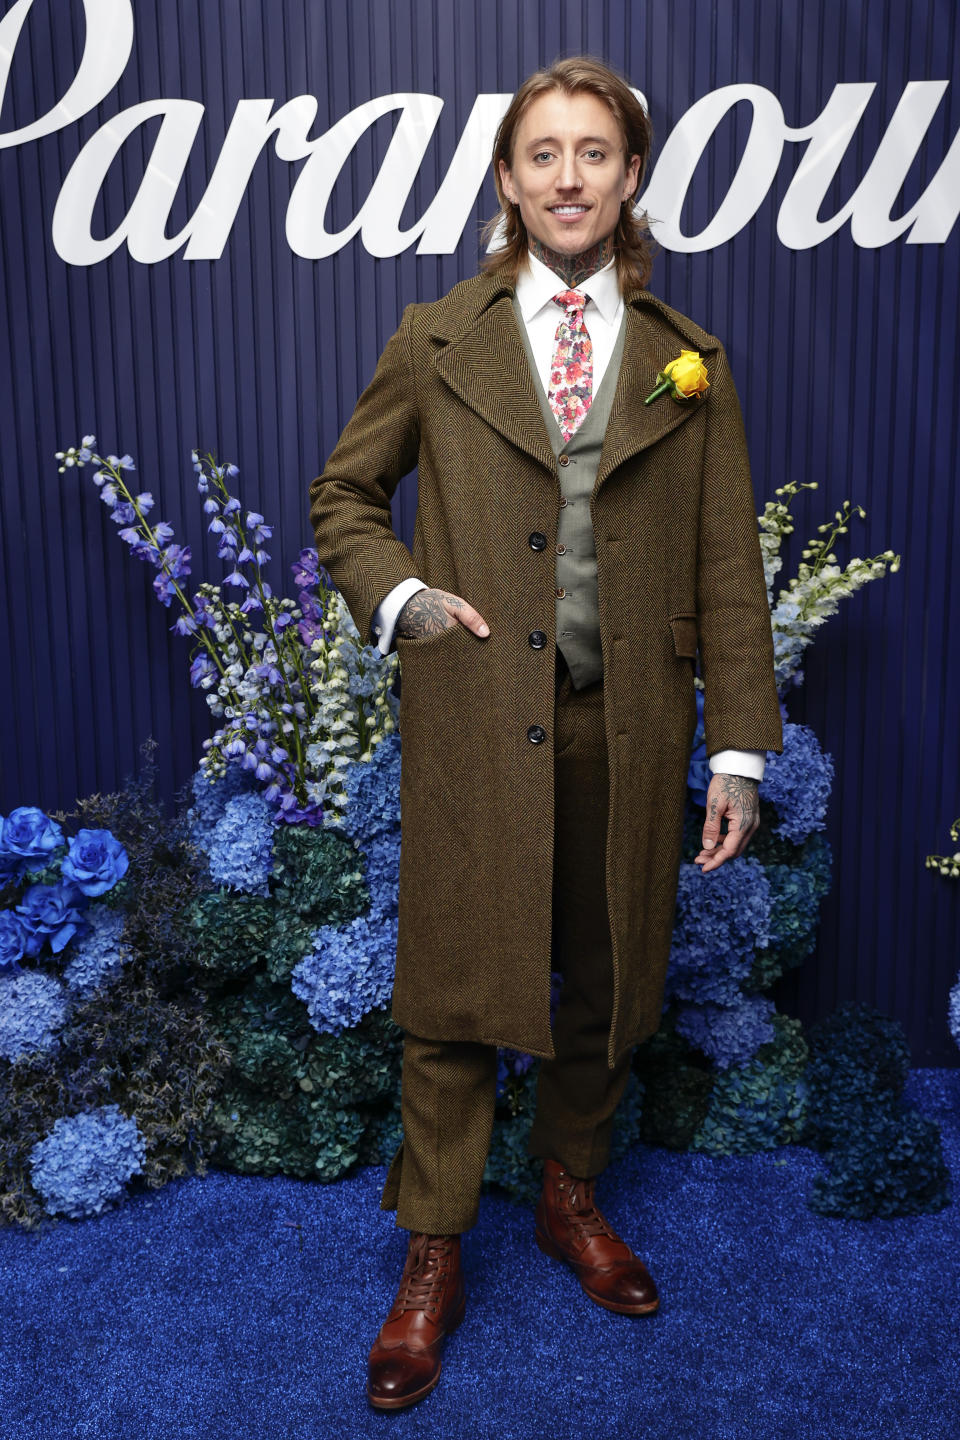 Ciarran Stott went for a brown ensemble, with an overcoat, matching pants, a grey waistcoat and floral tie. Photo: Getty